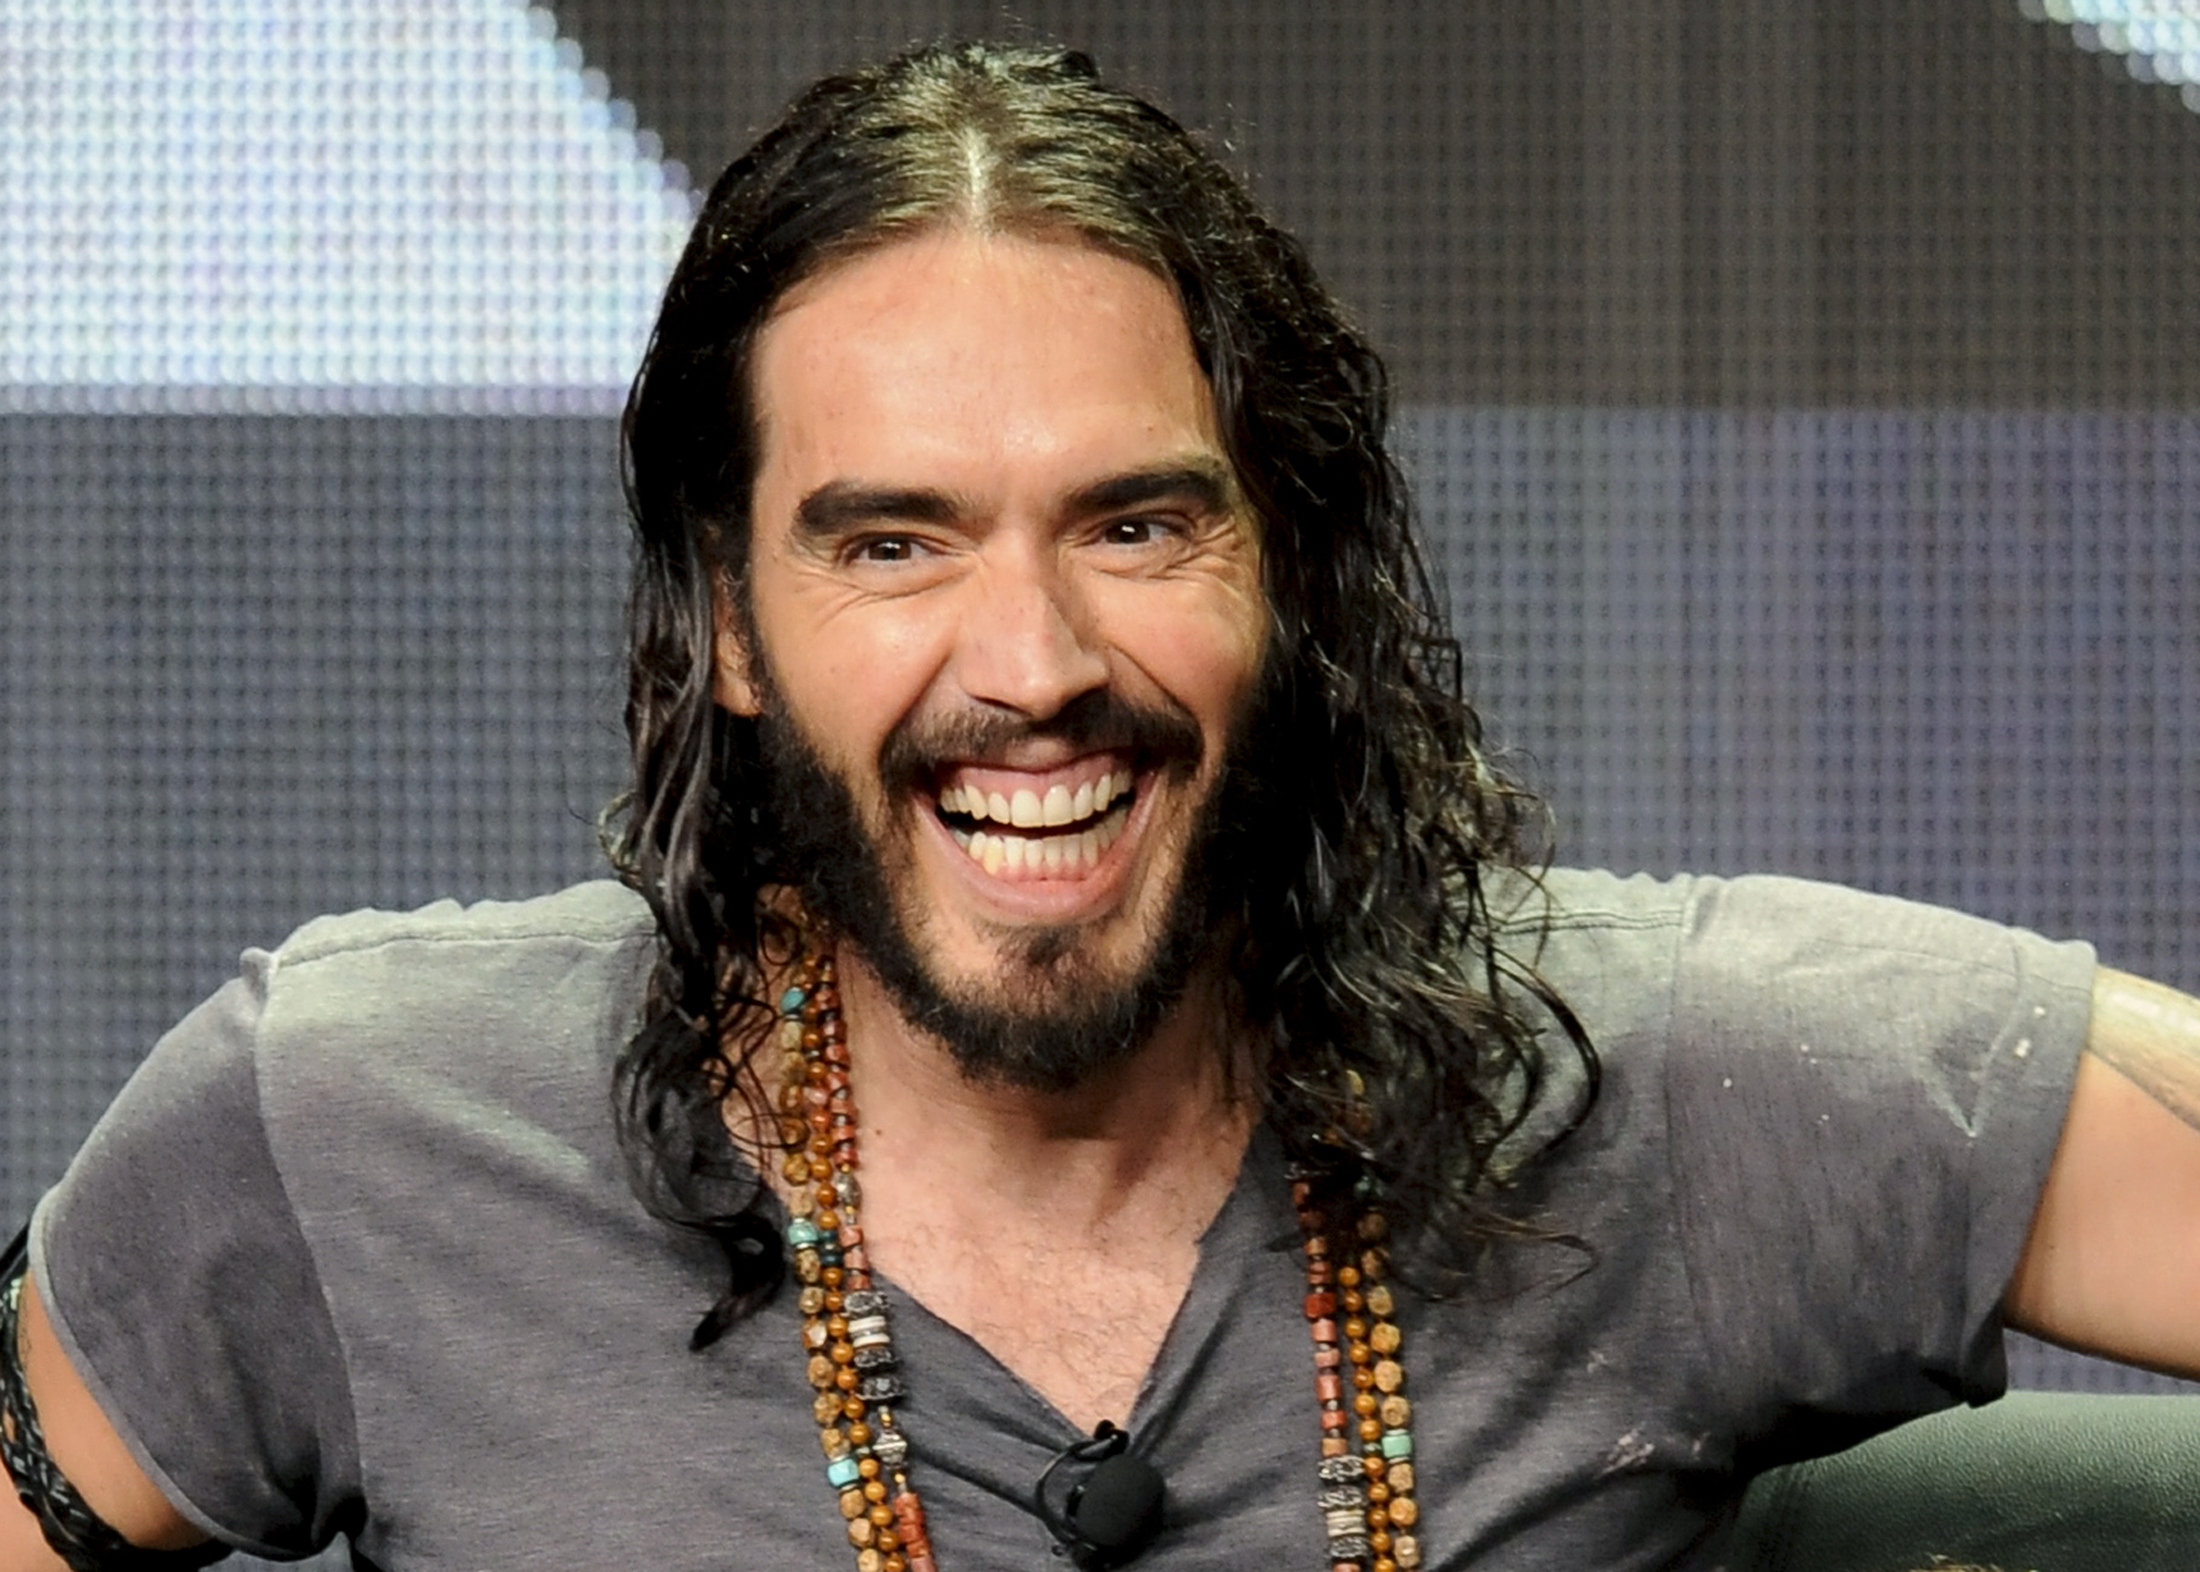 British actor and comedian Russell Brand from the FX show "Brand X With Russell Brand" takes part in a panel discussion at the FX Networks session of the 2012 Television Critics Association Summer Press Tour in Beverly Hills, California, July 28, 2012. REUTERS/Gus Ruelas (UNITED STATES - Tags: ENTERTAINMENT)